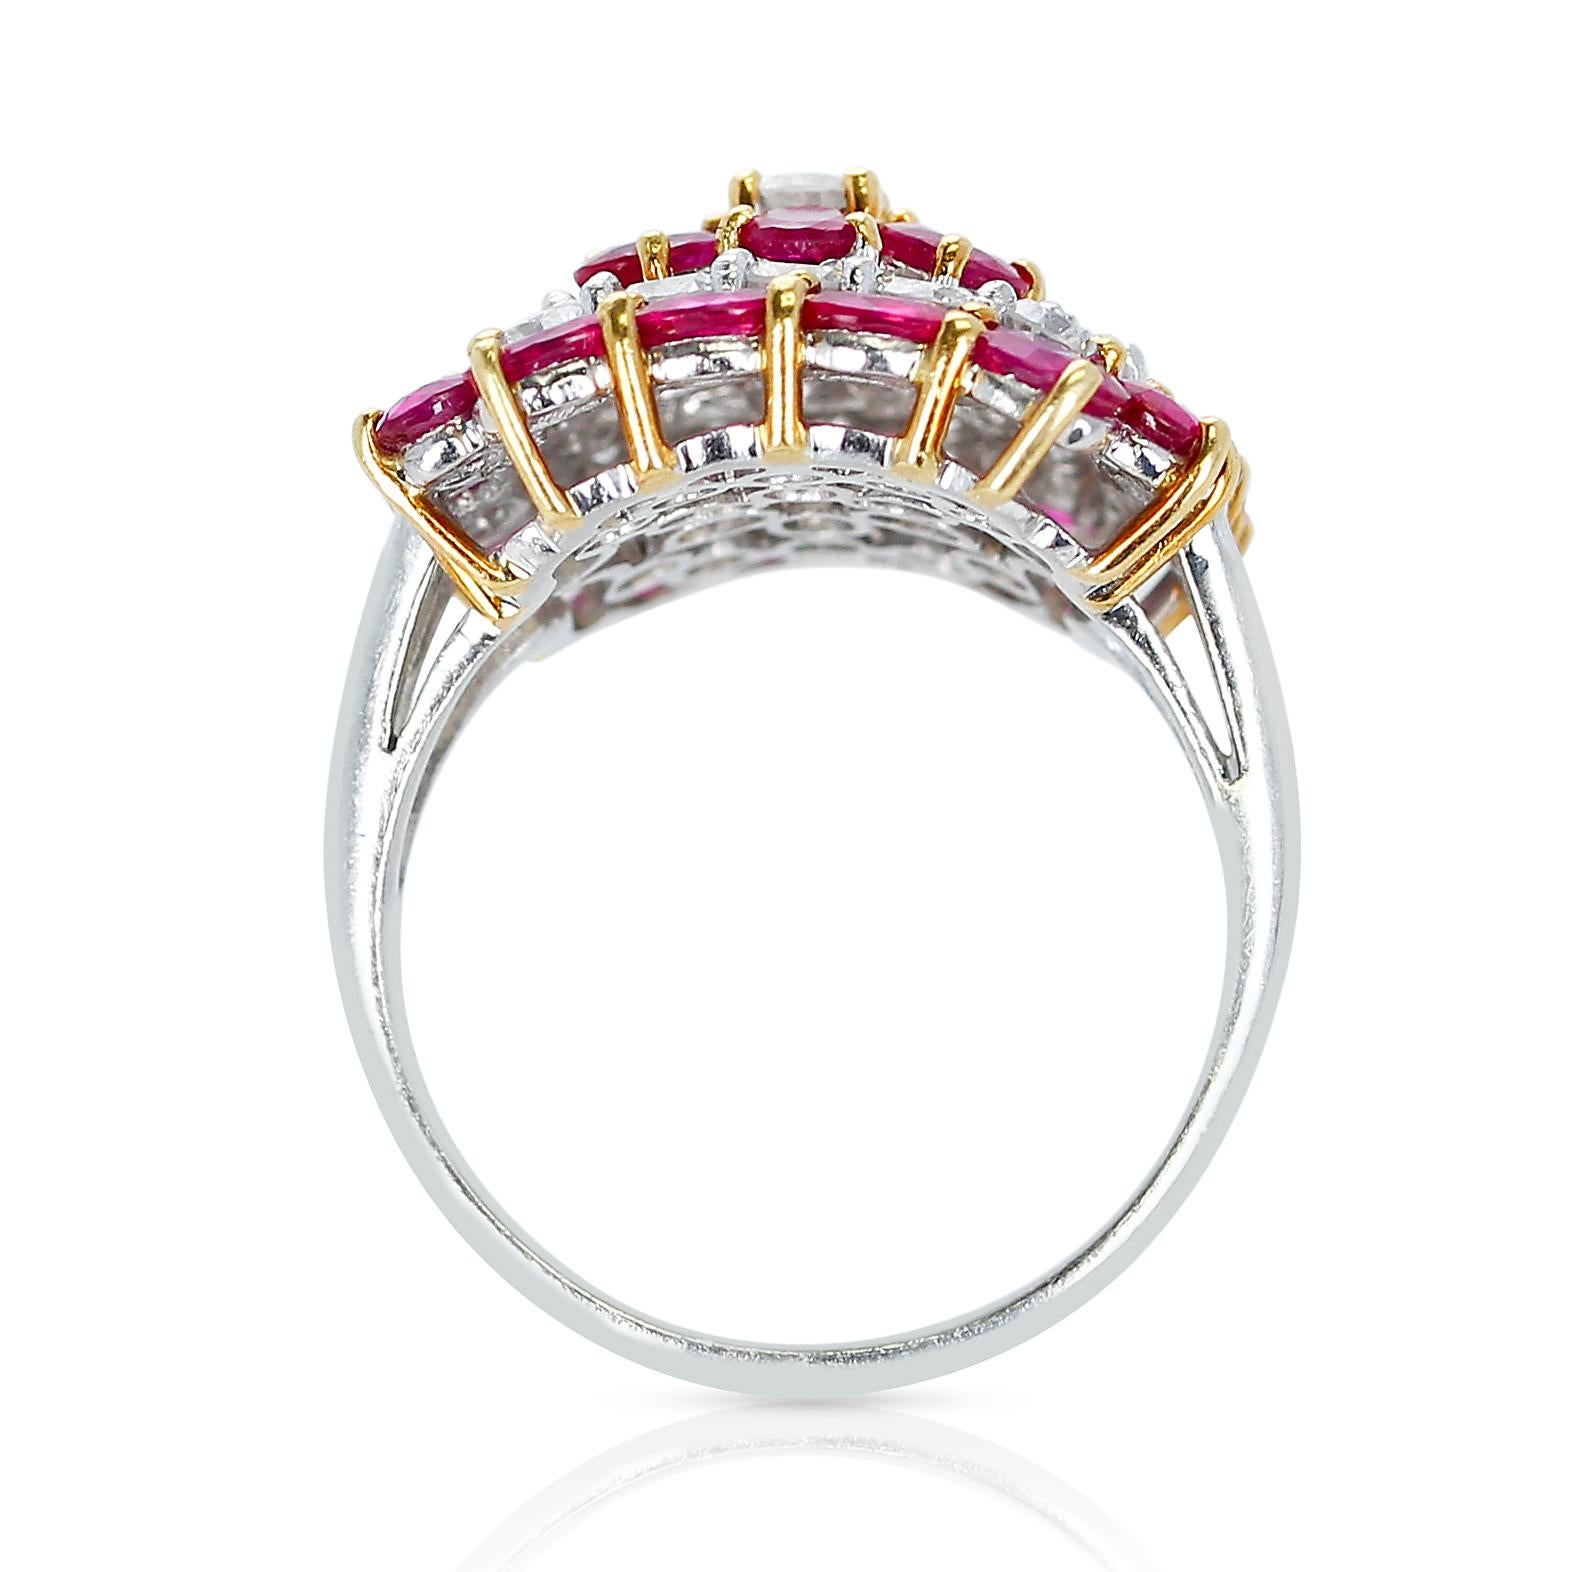 A Floral-Design Round 4.19 carats of Ruby and 1.50 carats of Diamond Ring made in Platinum & 18 Karat Yellow Gold. The total weight of the ring is 10.90 grams. The Ring Size is US 8.25. 

 
